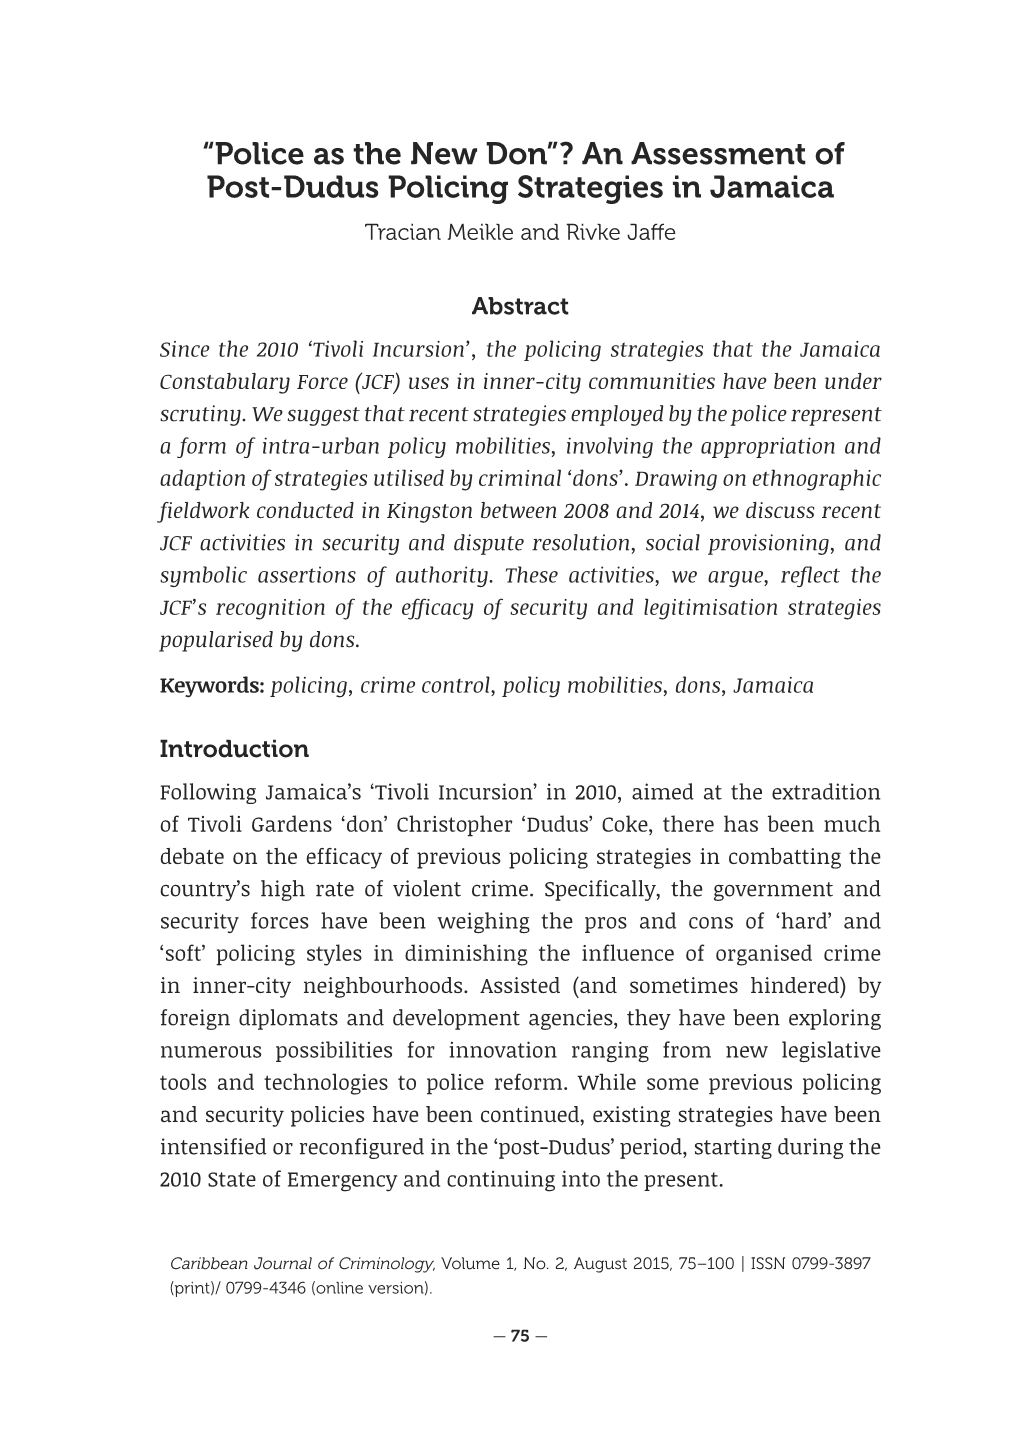 An Assessment of Post-Dudus Policing Strategies in Jamaica Tracian Meikle and Rivke Jaffe